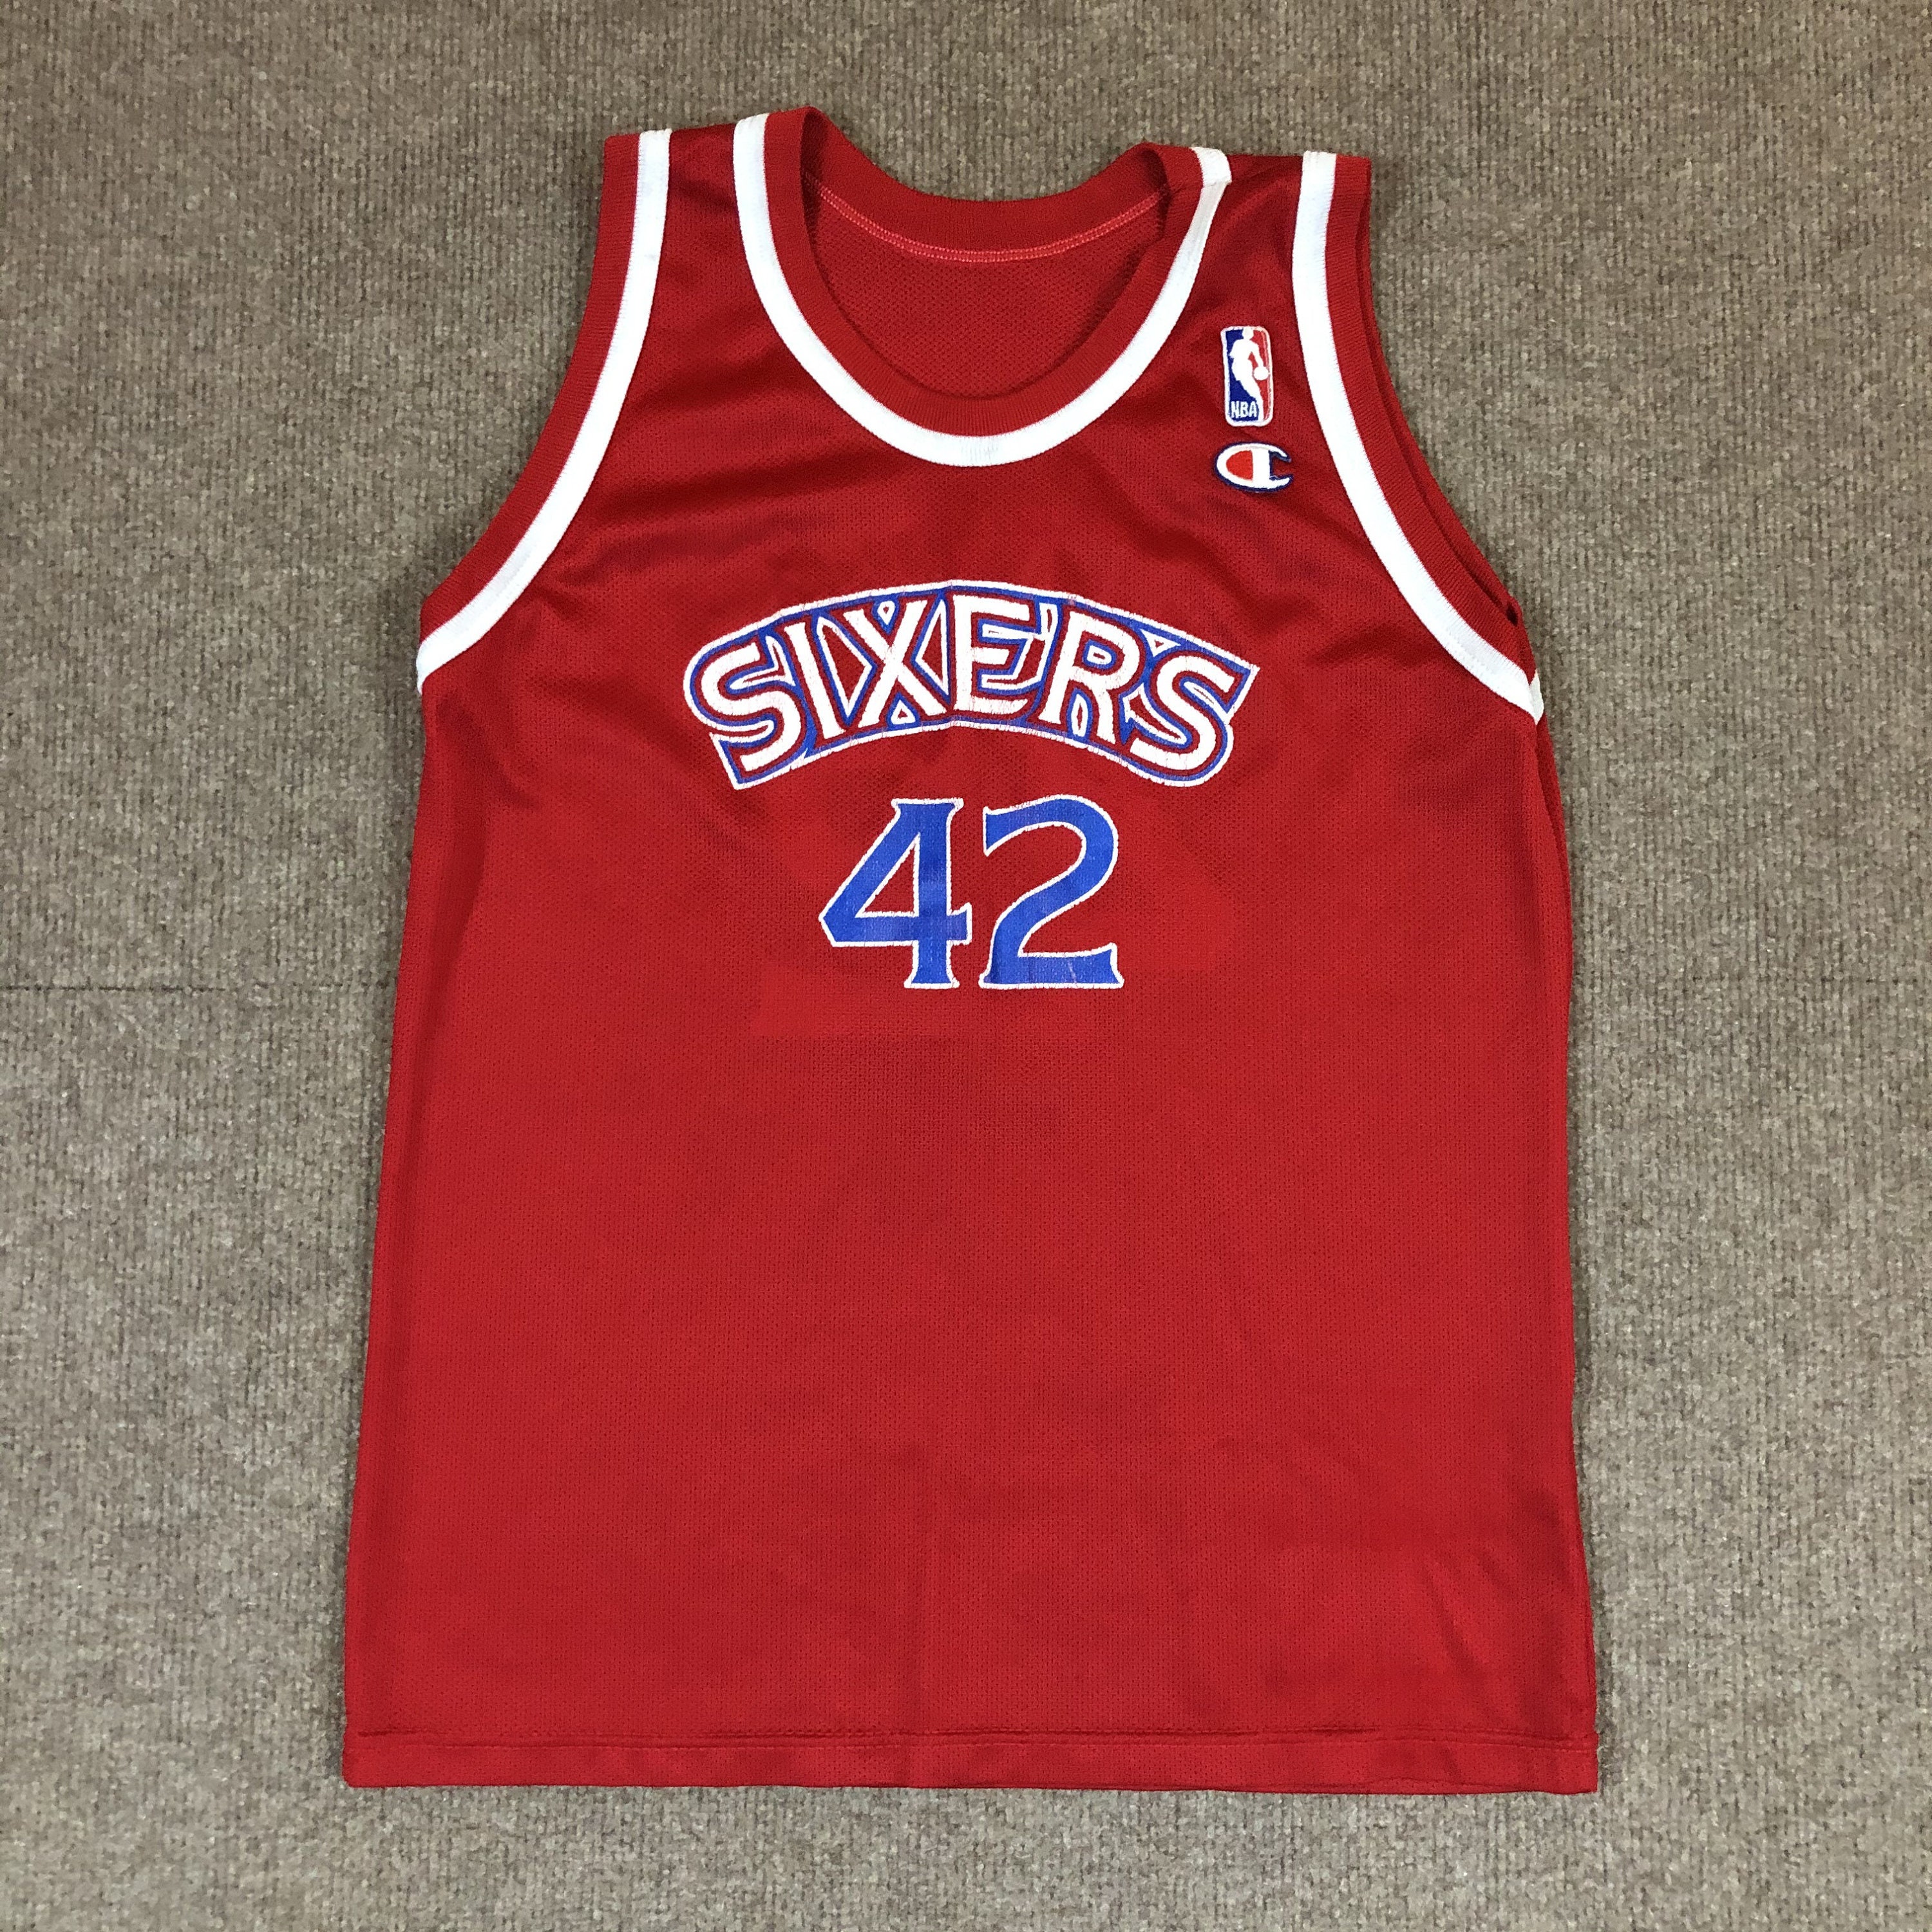 MAURICE CHEEKS PHILADELPHIA SIXERS RETRO SIGNED AUTHENTIC JERSEY ADULT XL